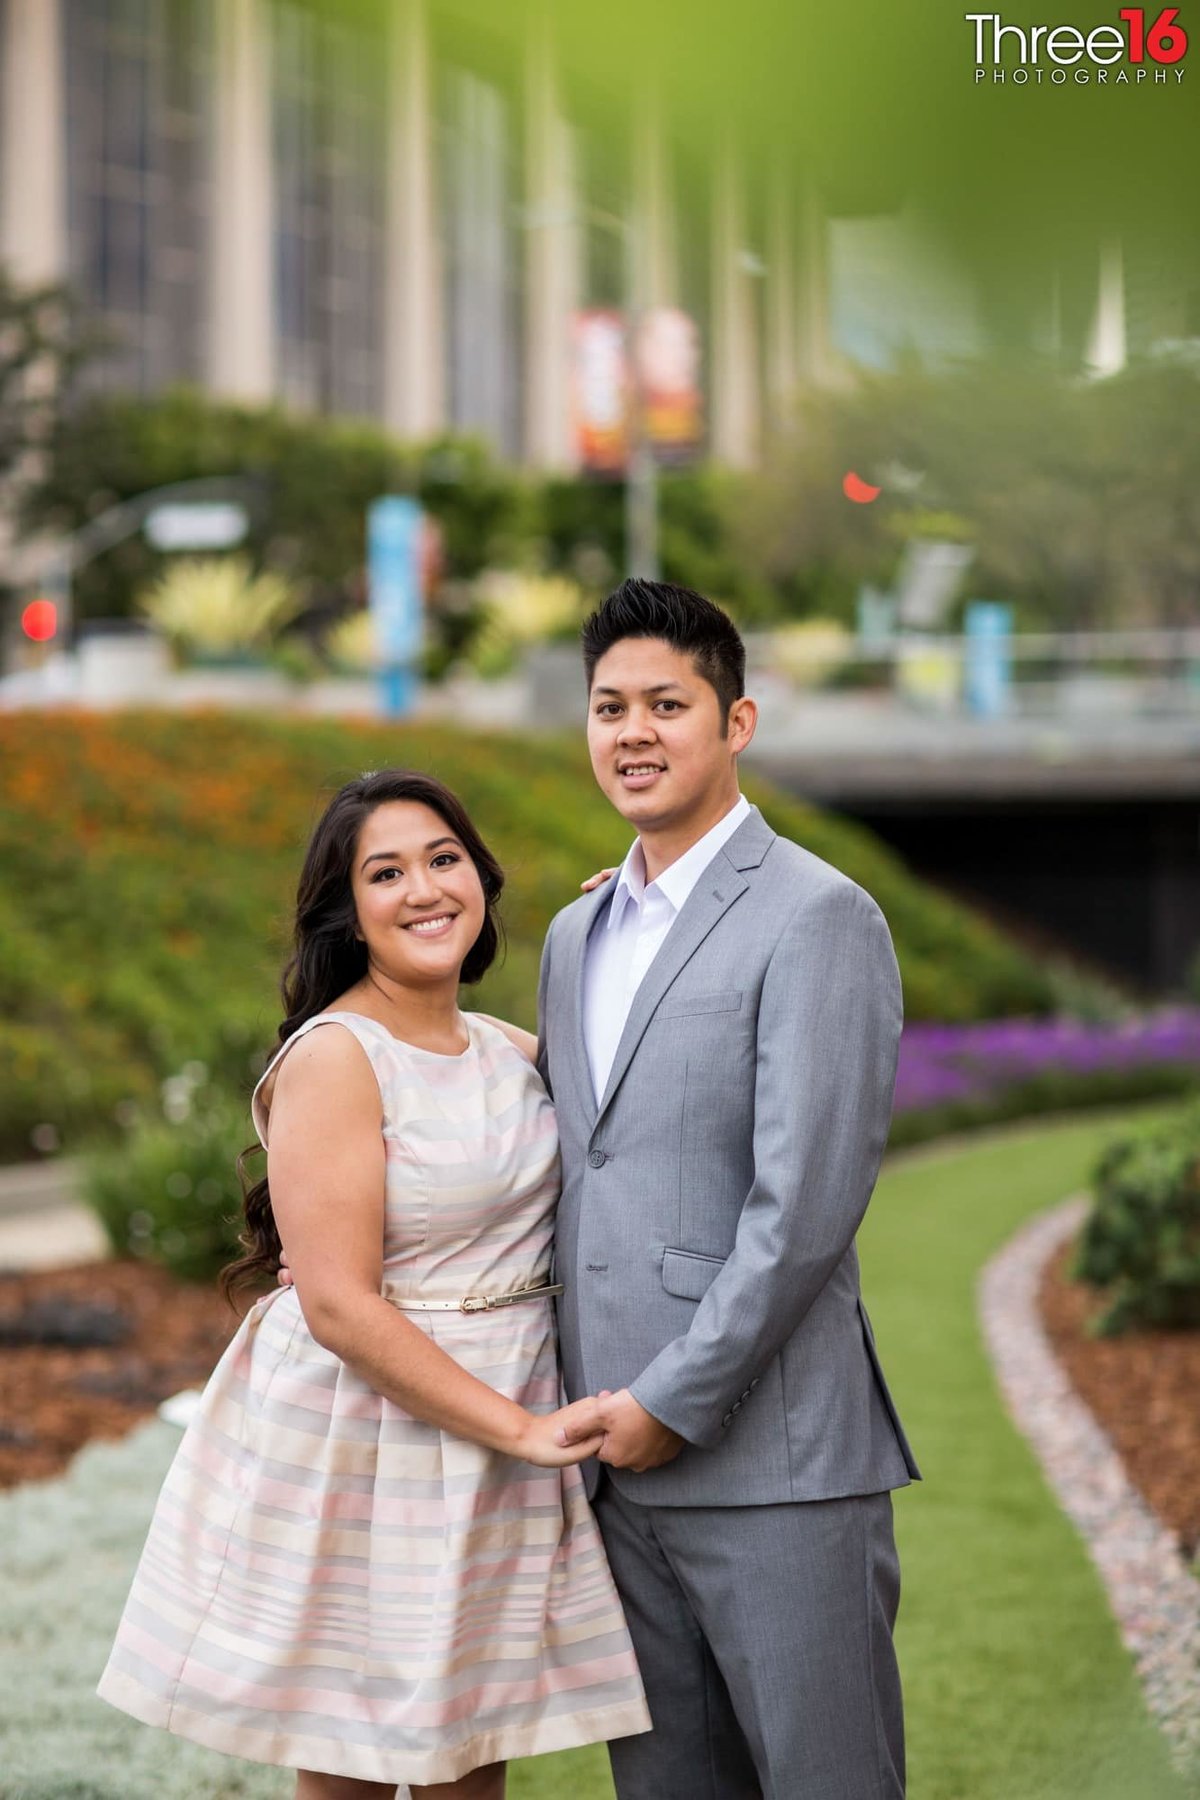 Engaged couple pose for photos while holding hands on the grass area at the Los Angeles Department of Water and Power Building